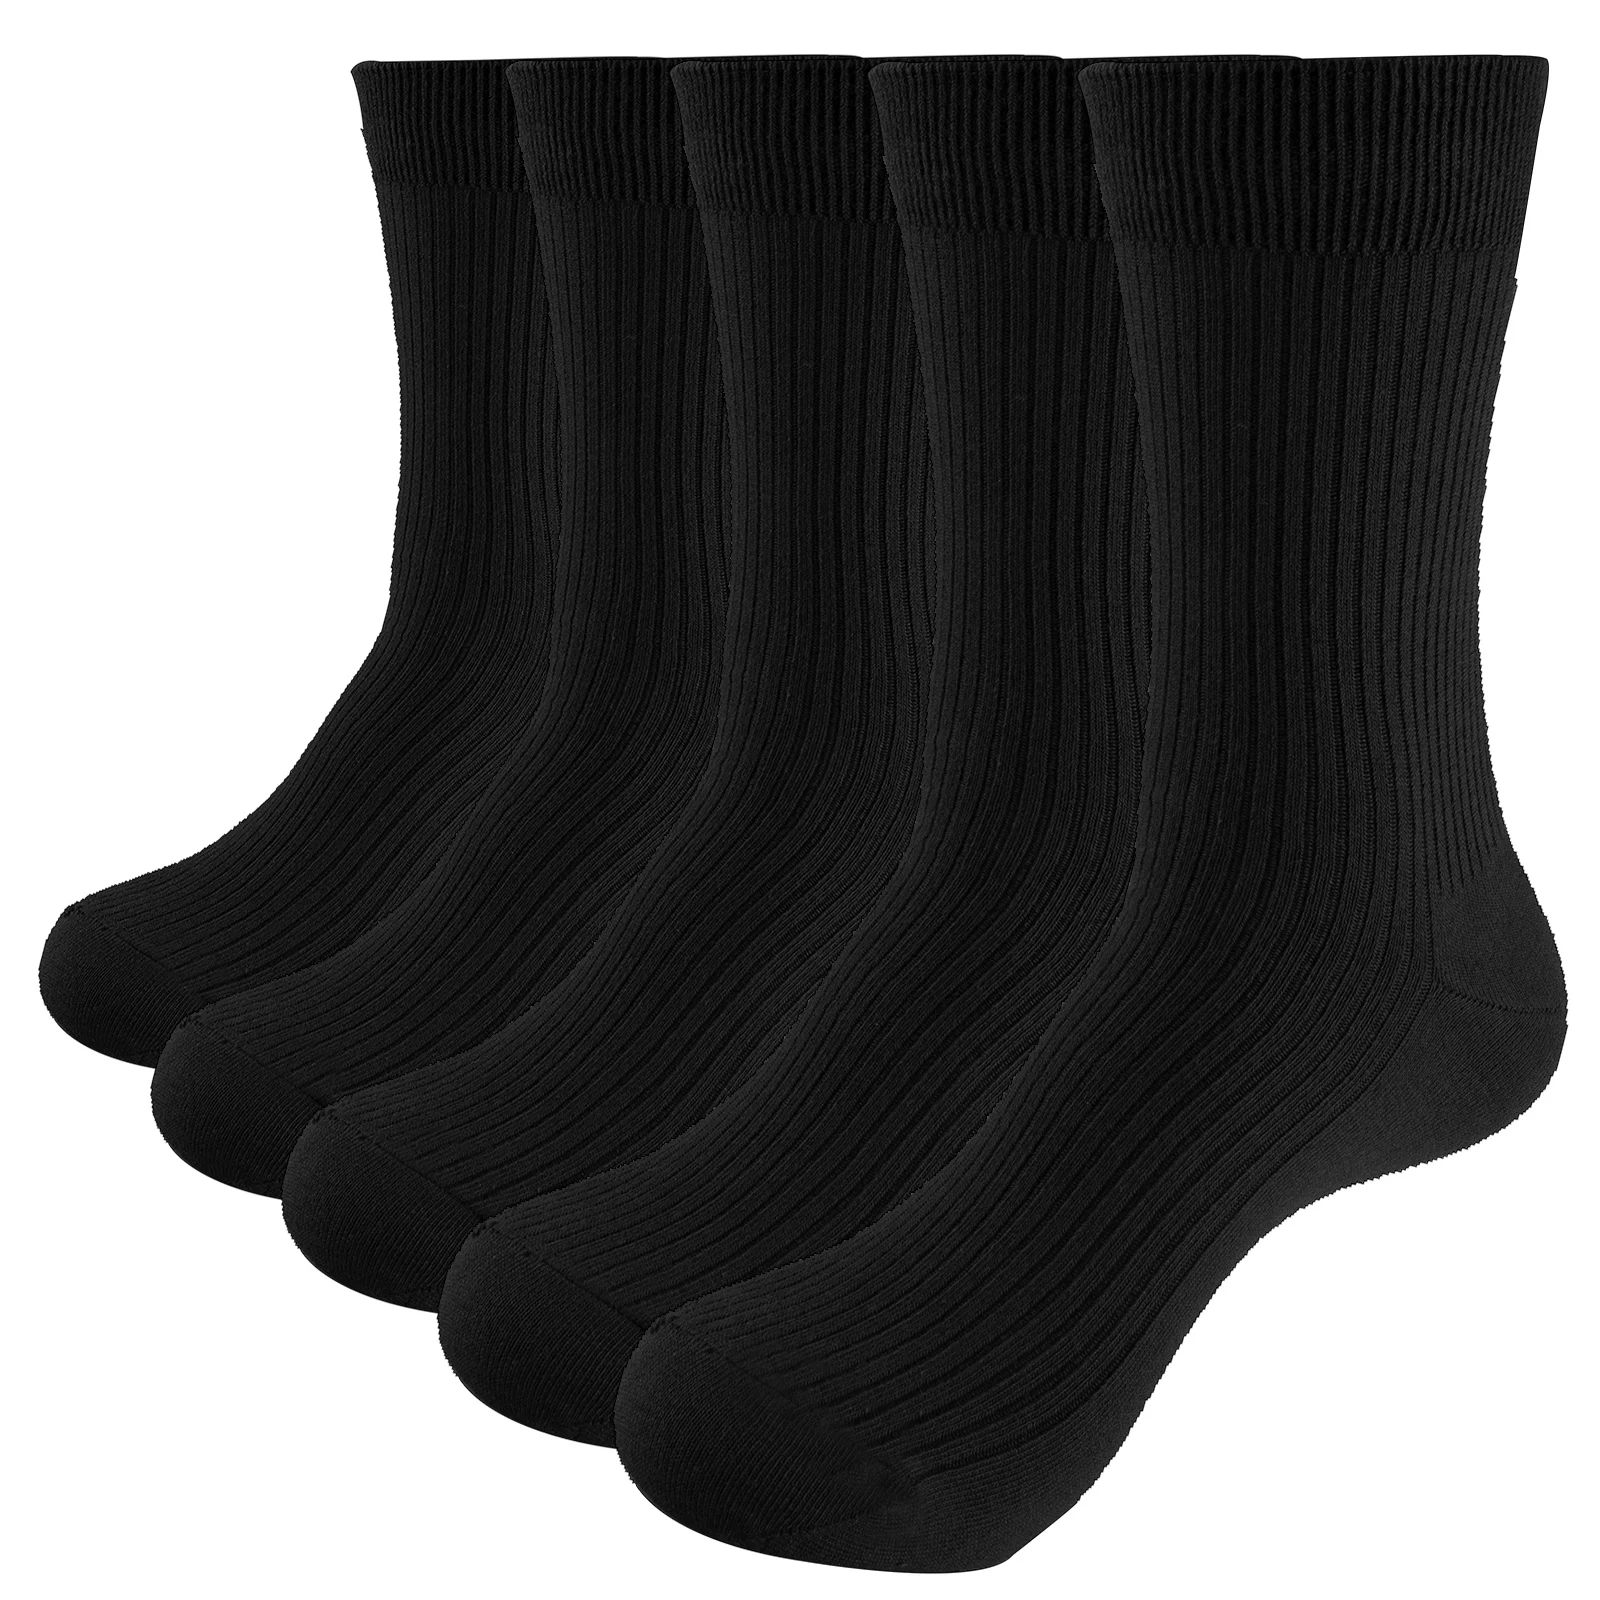 YUEDGE High Quality Soft Top Plain Everyday Casual Formal Business Thin Dress Men Socks For Male Size 37-46 EU